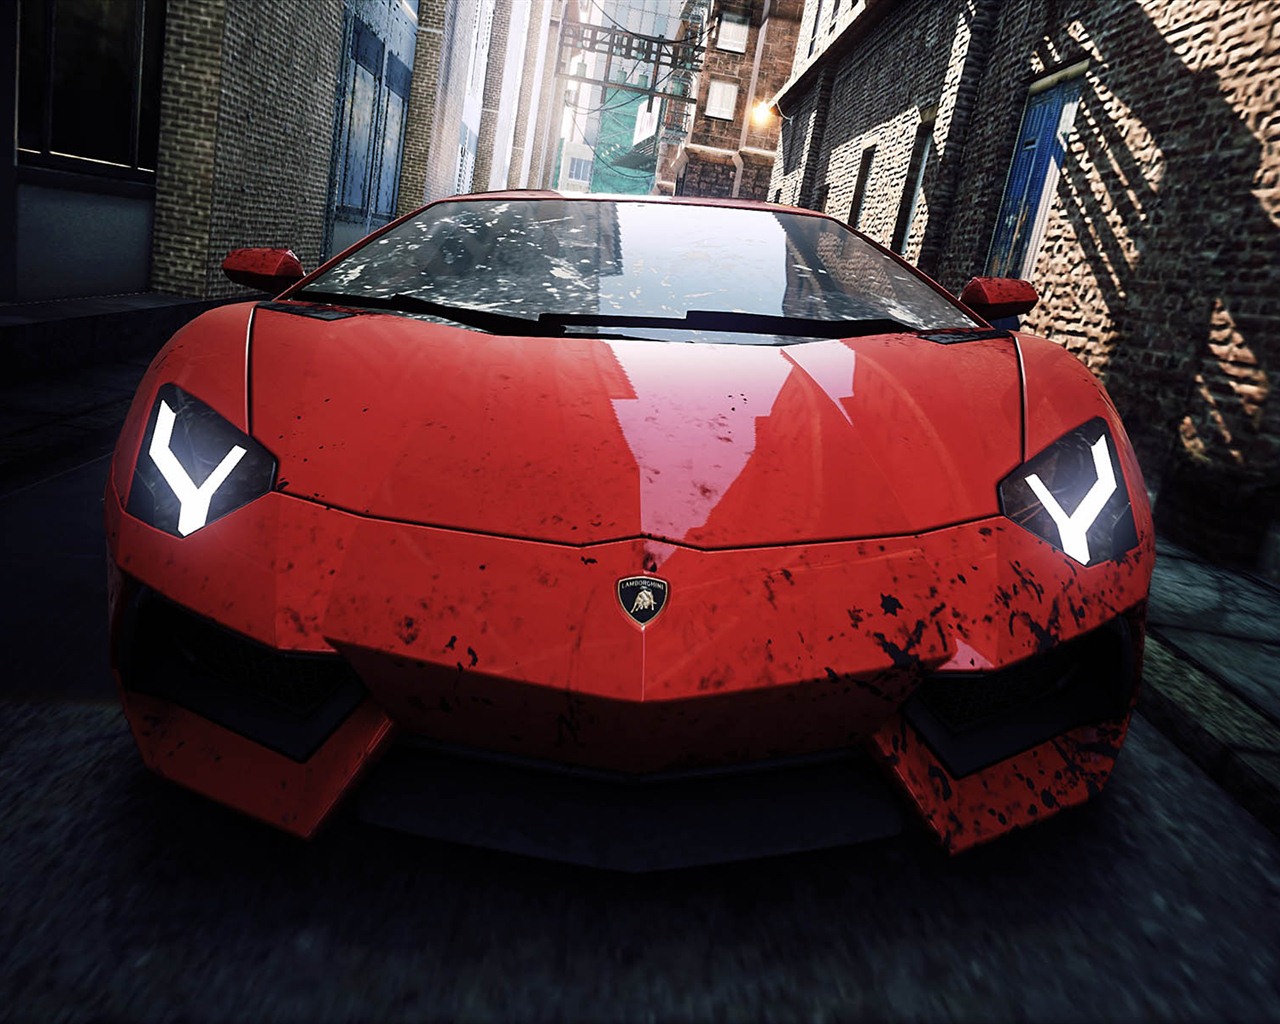 Need for Speed: Most Wanted 极品飞车17：最高通缉 高清壁纸10 - 1280x1024